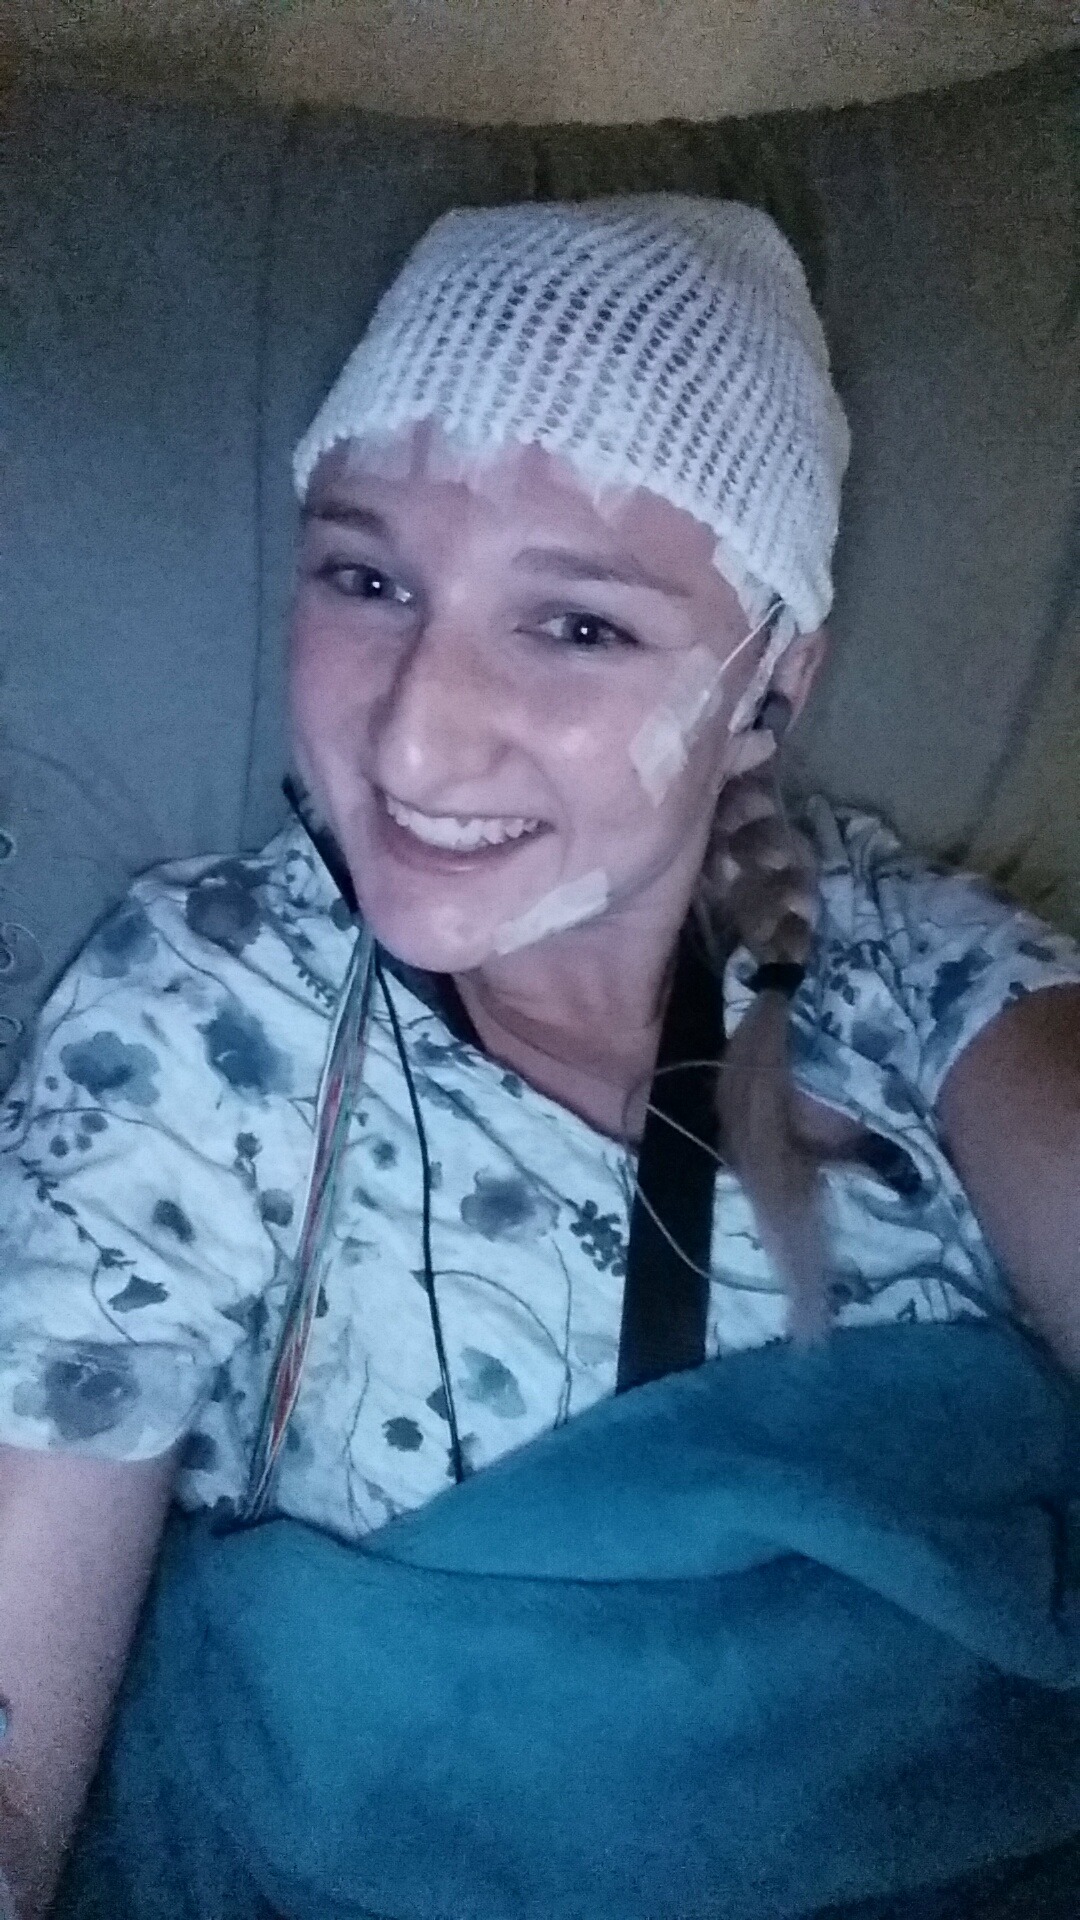 Katie is wearing a cap and wires in the epilepsy monitoring unit